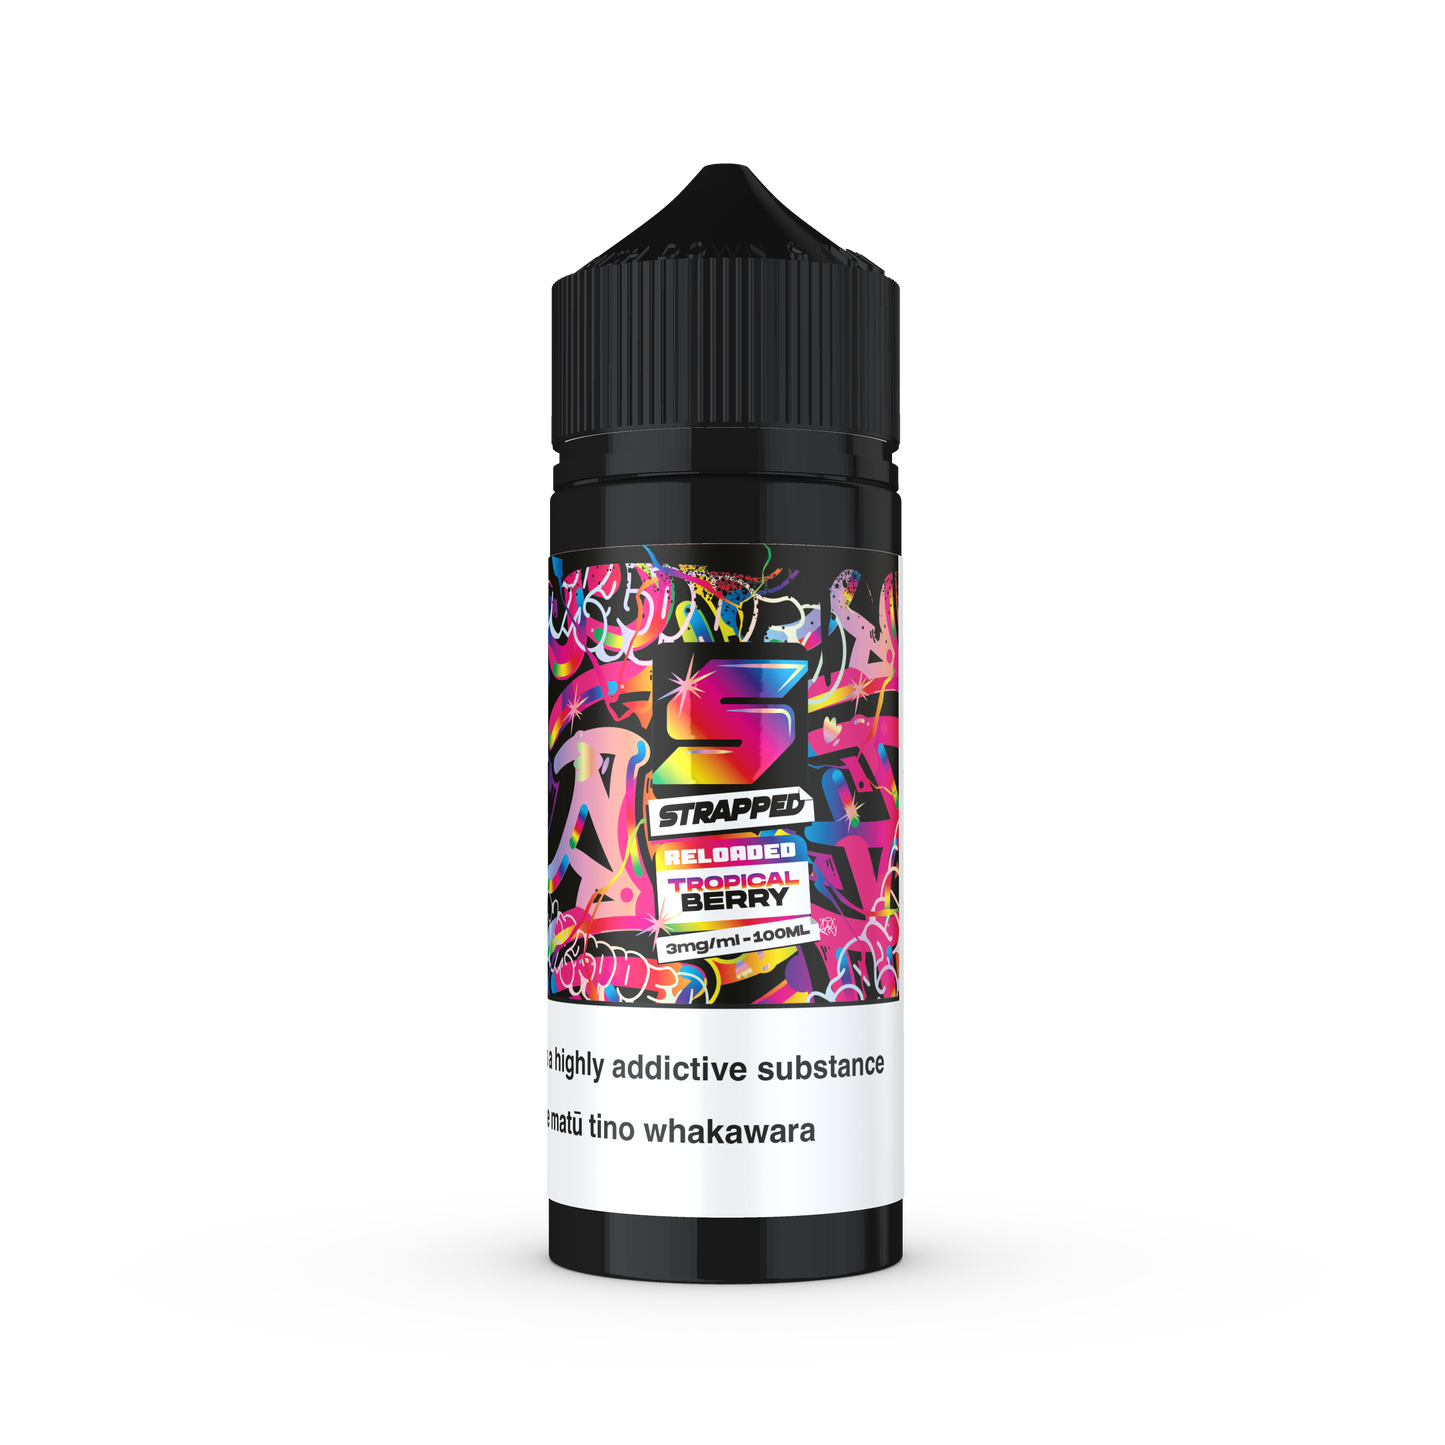 Strapped Reloaded - Tropical Berry (Super Rainbow Candy)